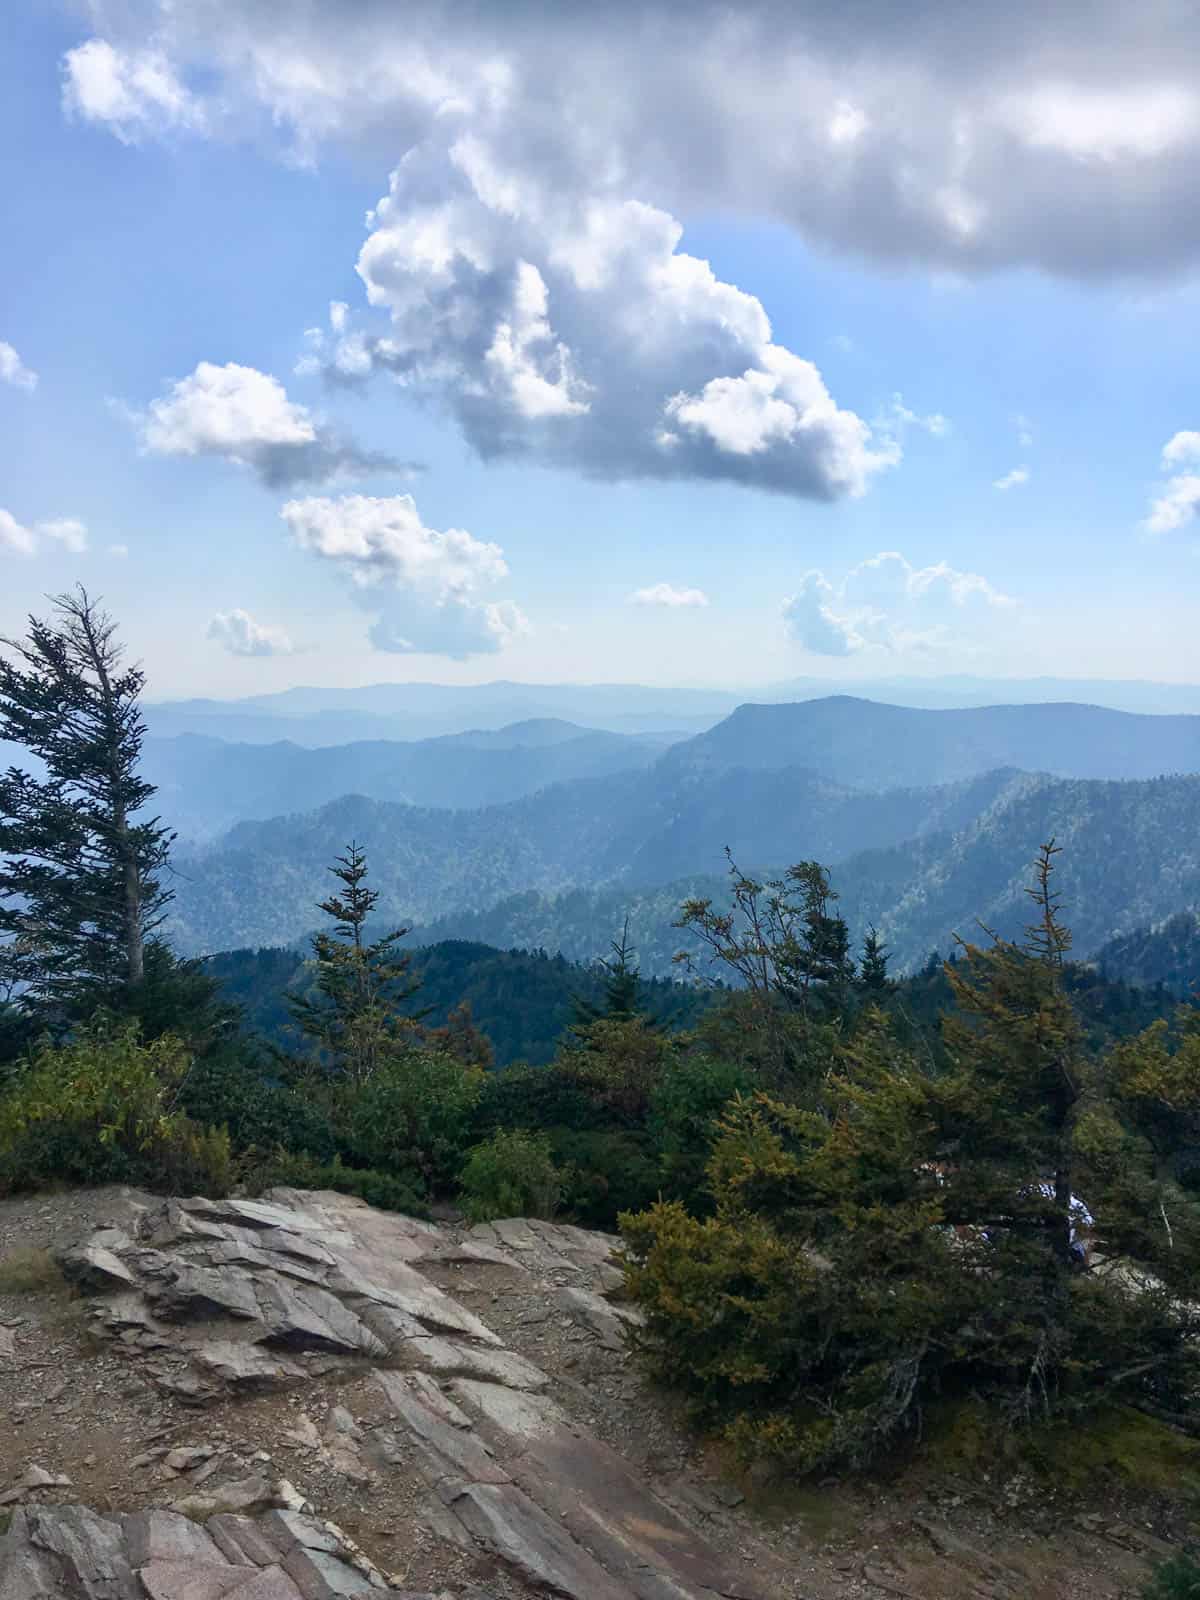 View from Myrtle Point in the Smoky Mountains.